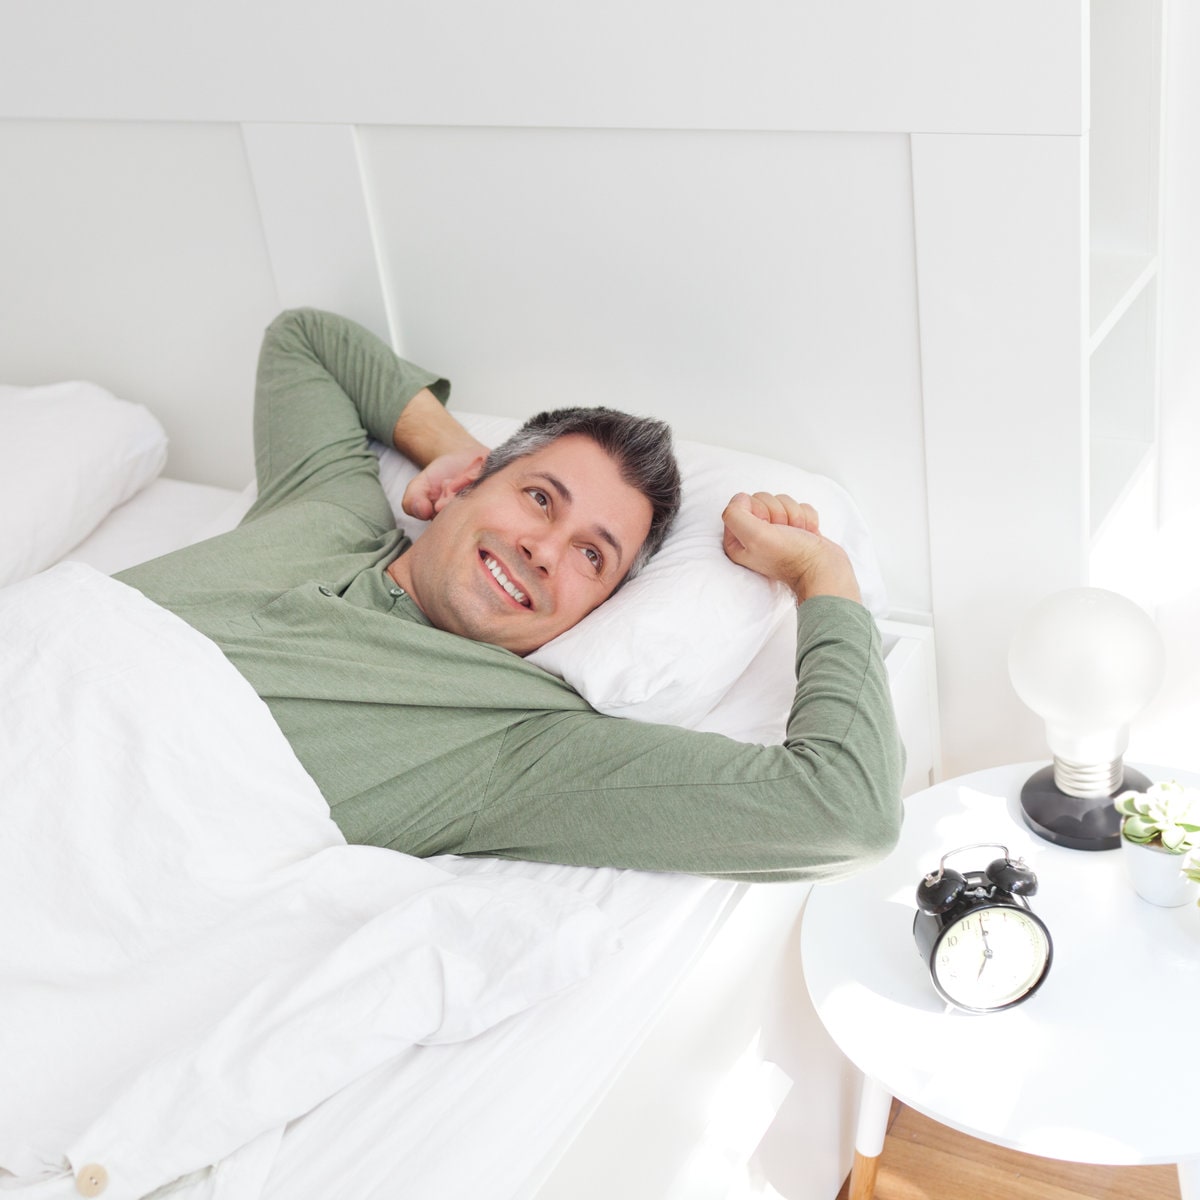 Man wakes up from a nap in a white bed during the daytime and experiences an afternoon energy boost